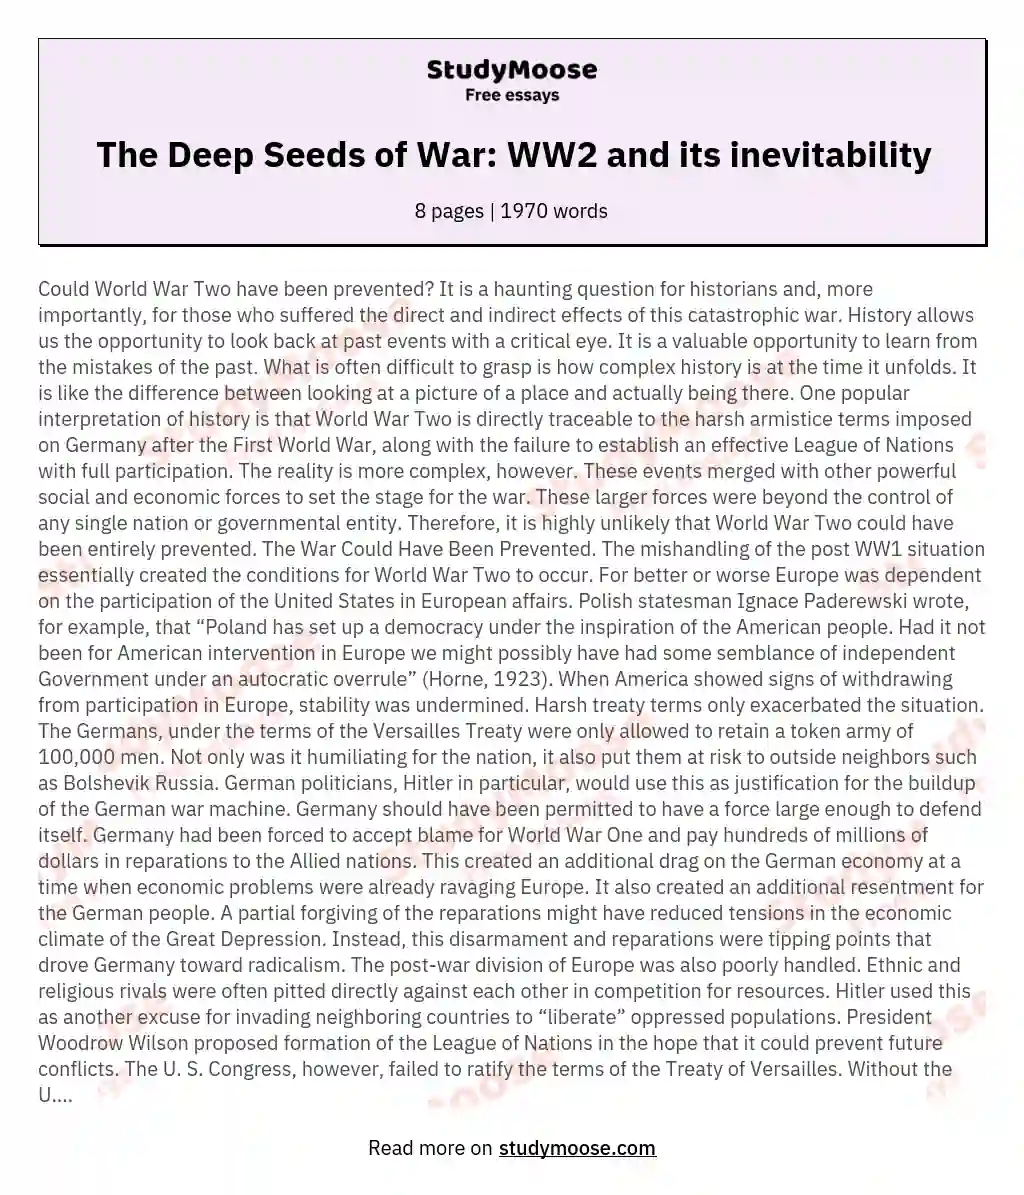 The Deep Seeds of War: WW2 and its inevitability